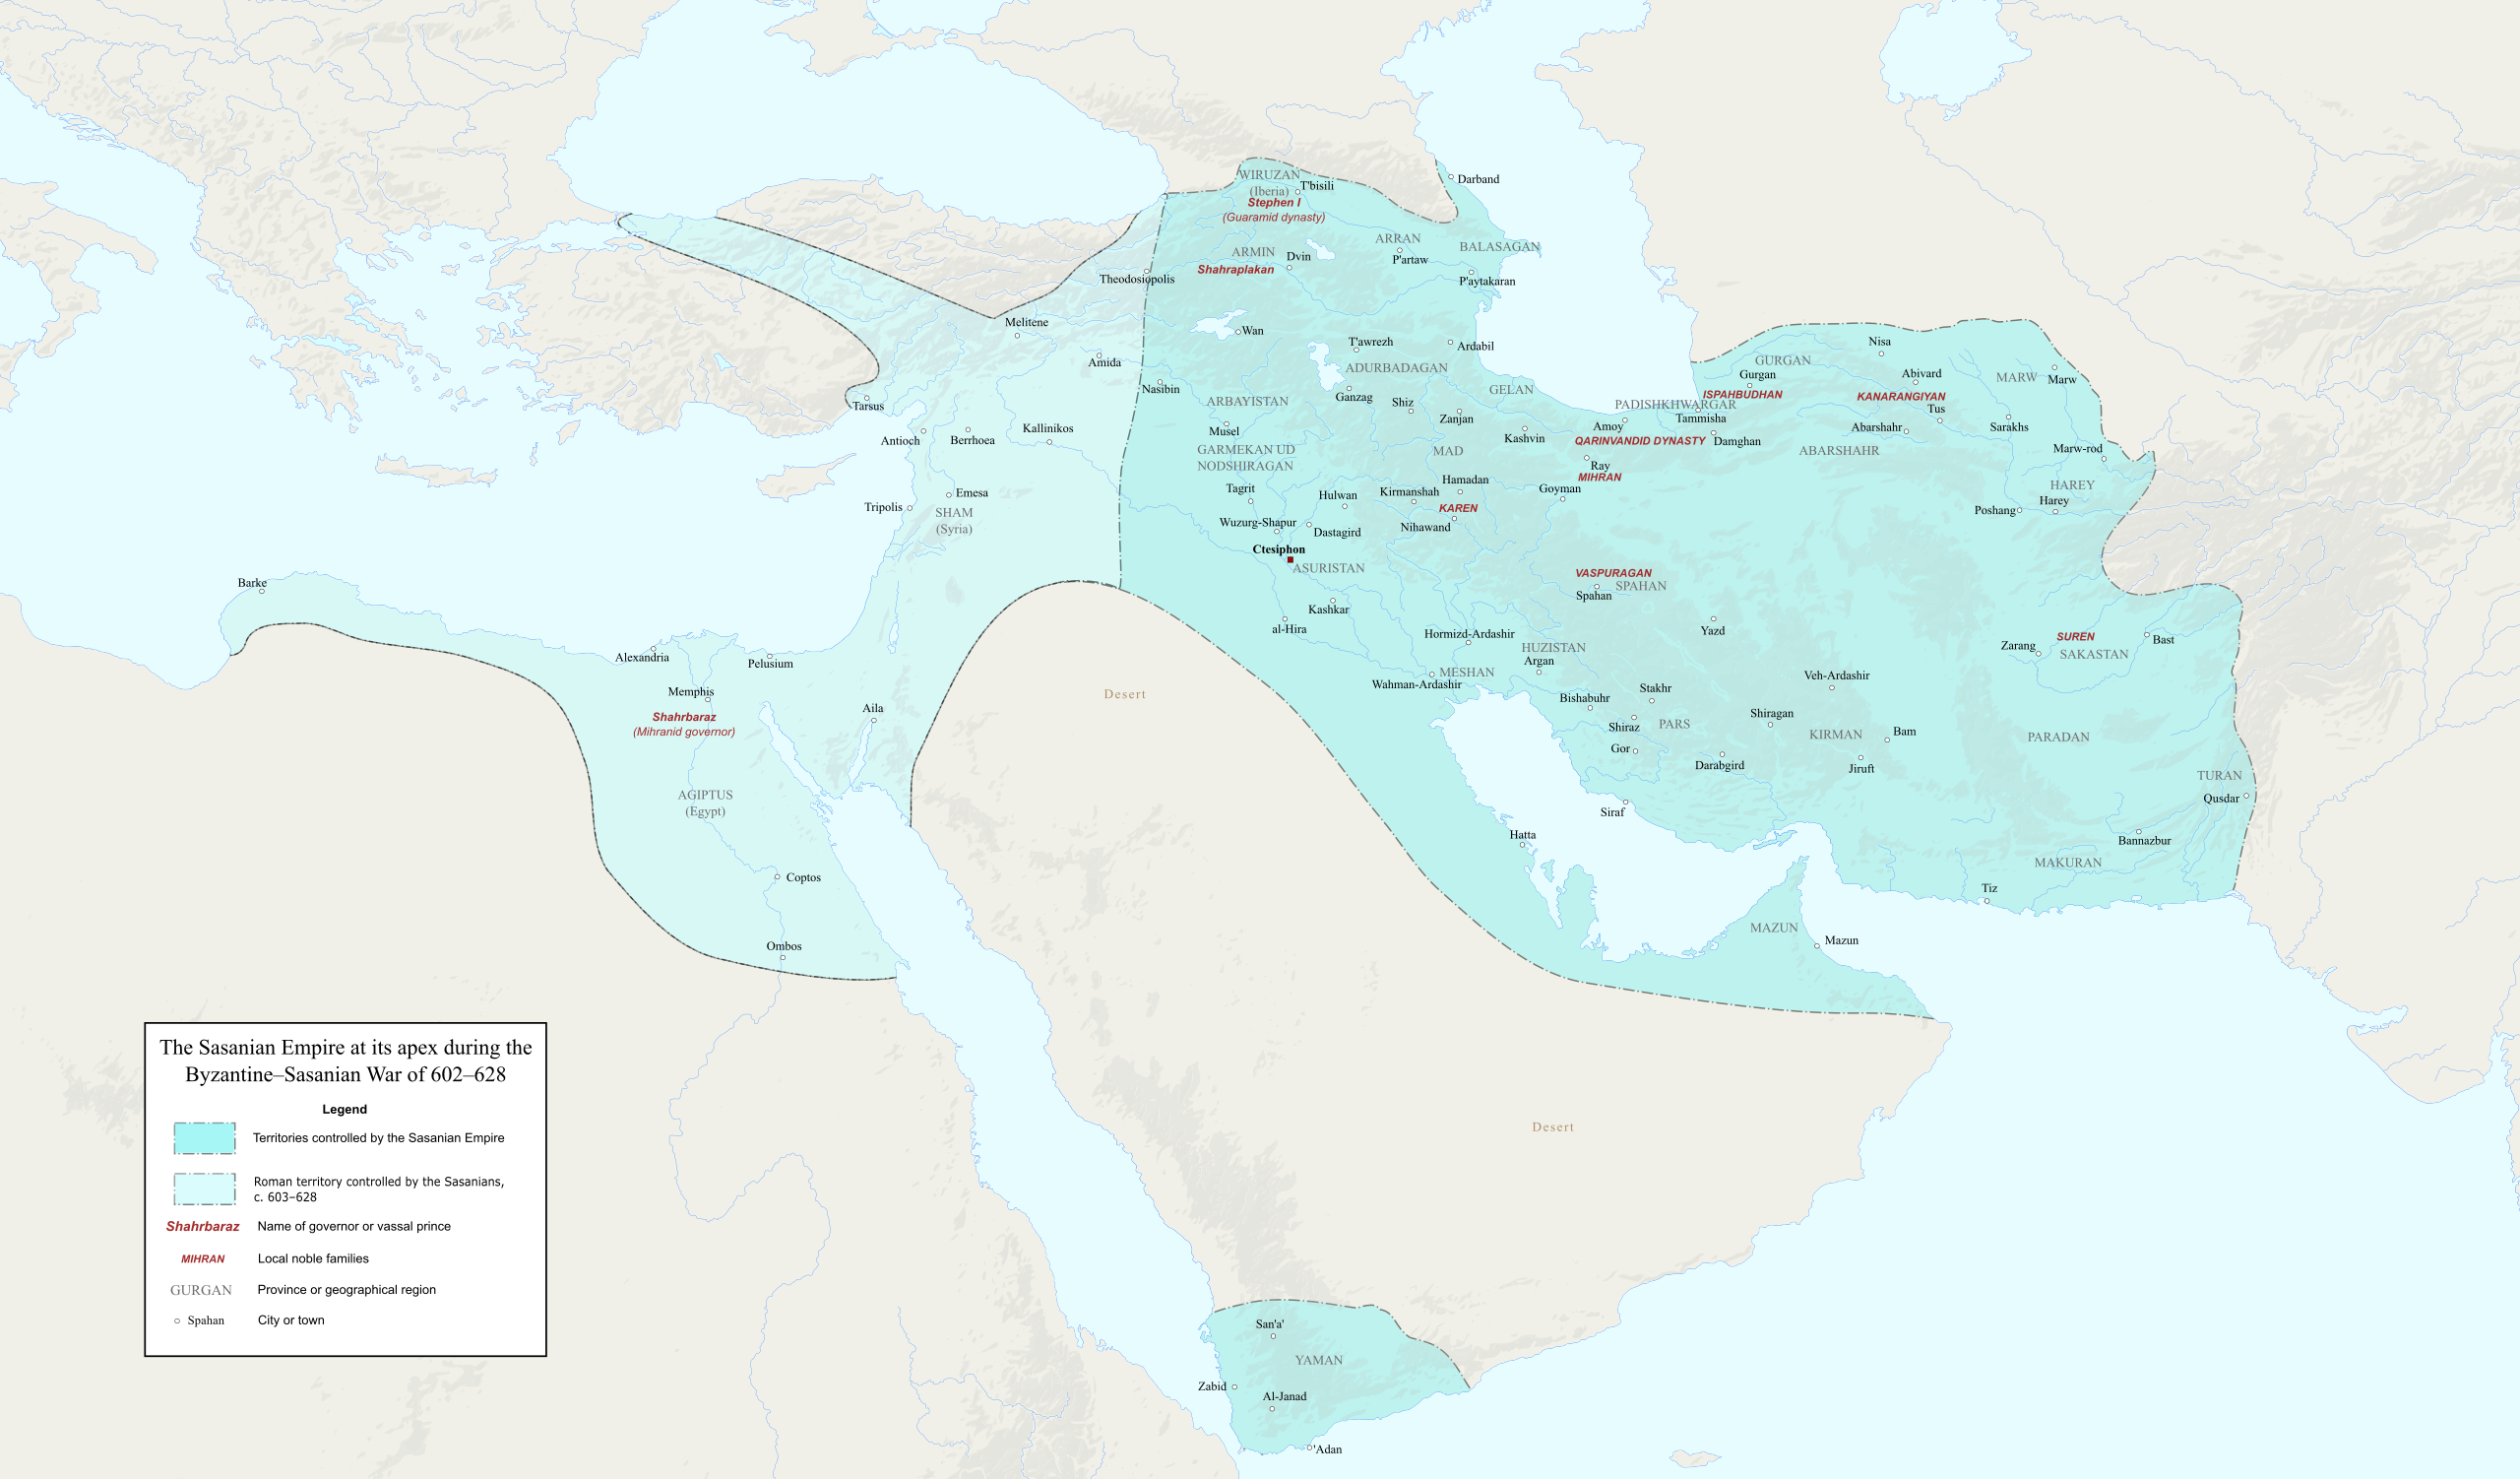 Sasanian Empire at its extent in year 628 AD